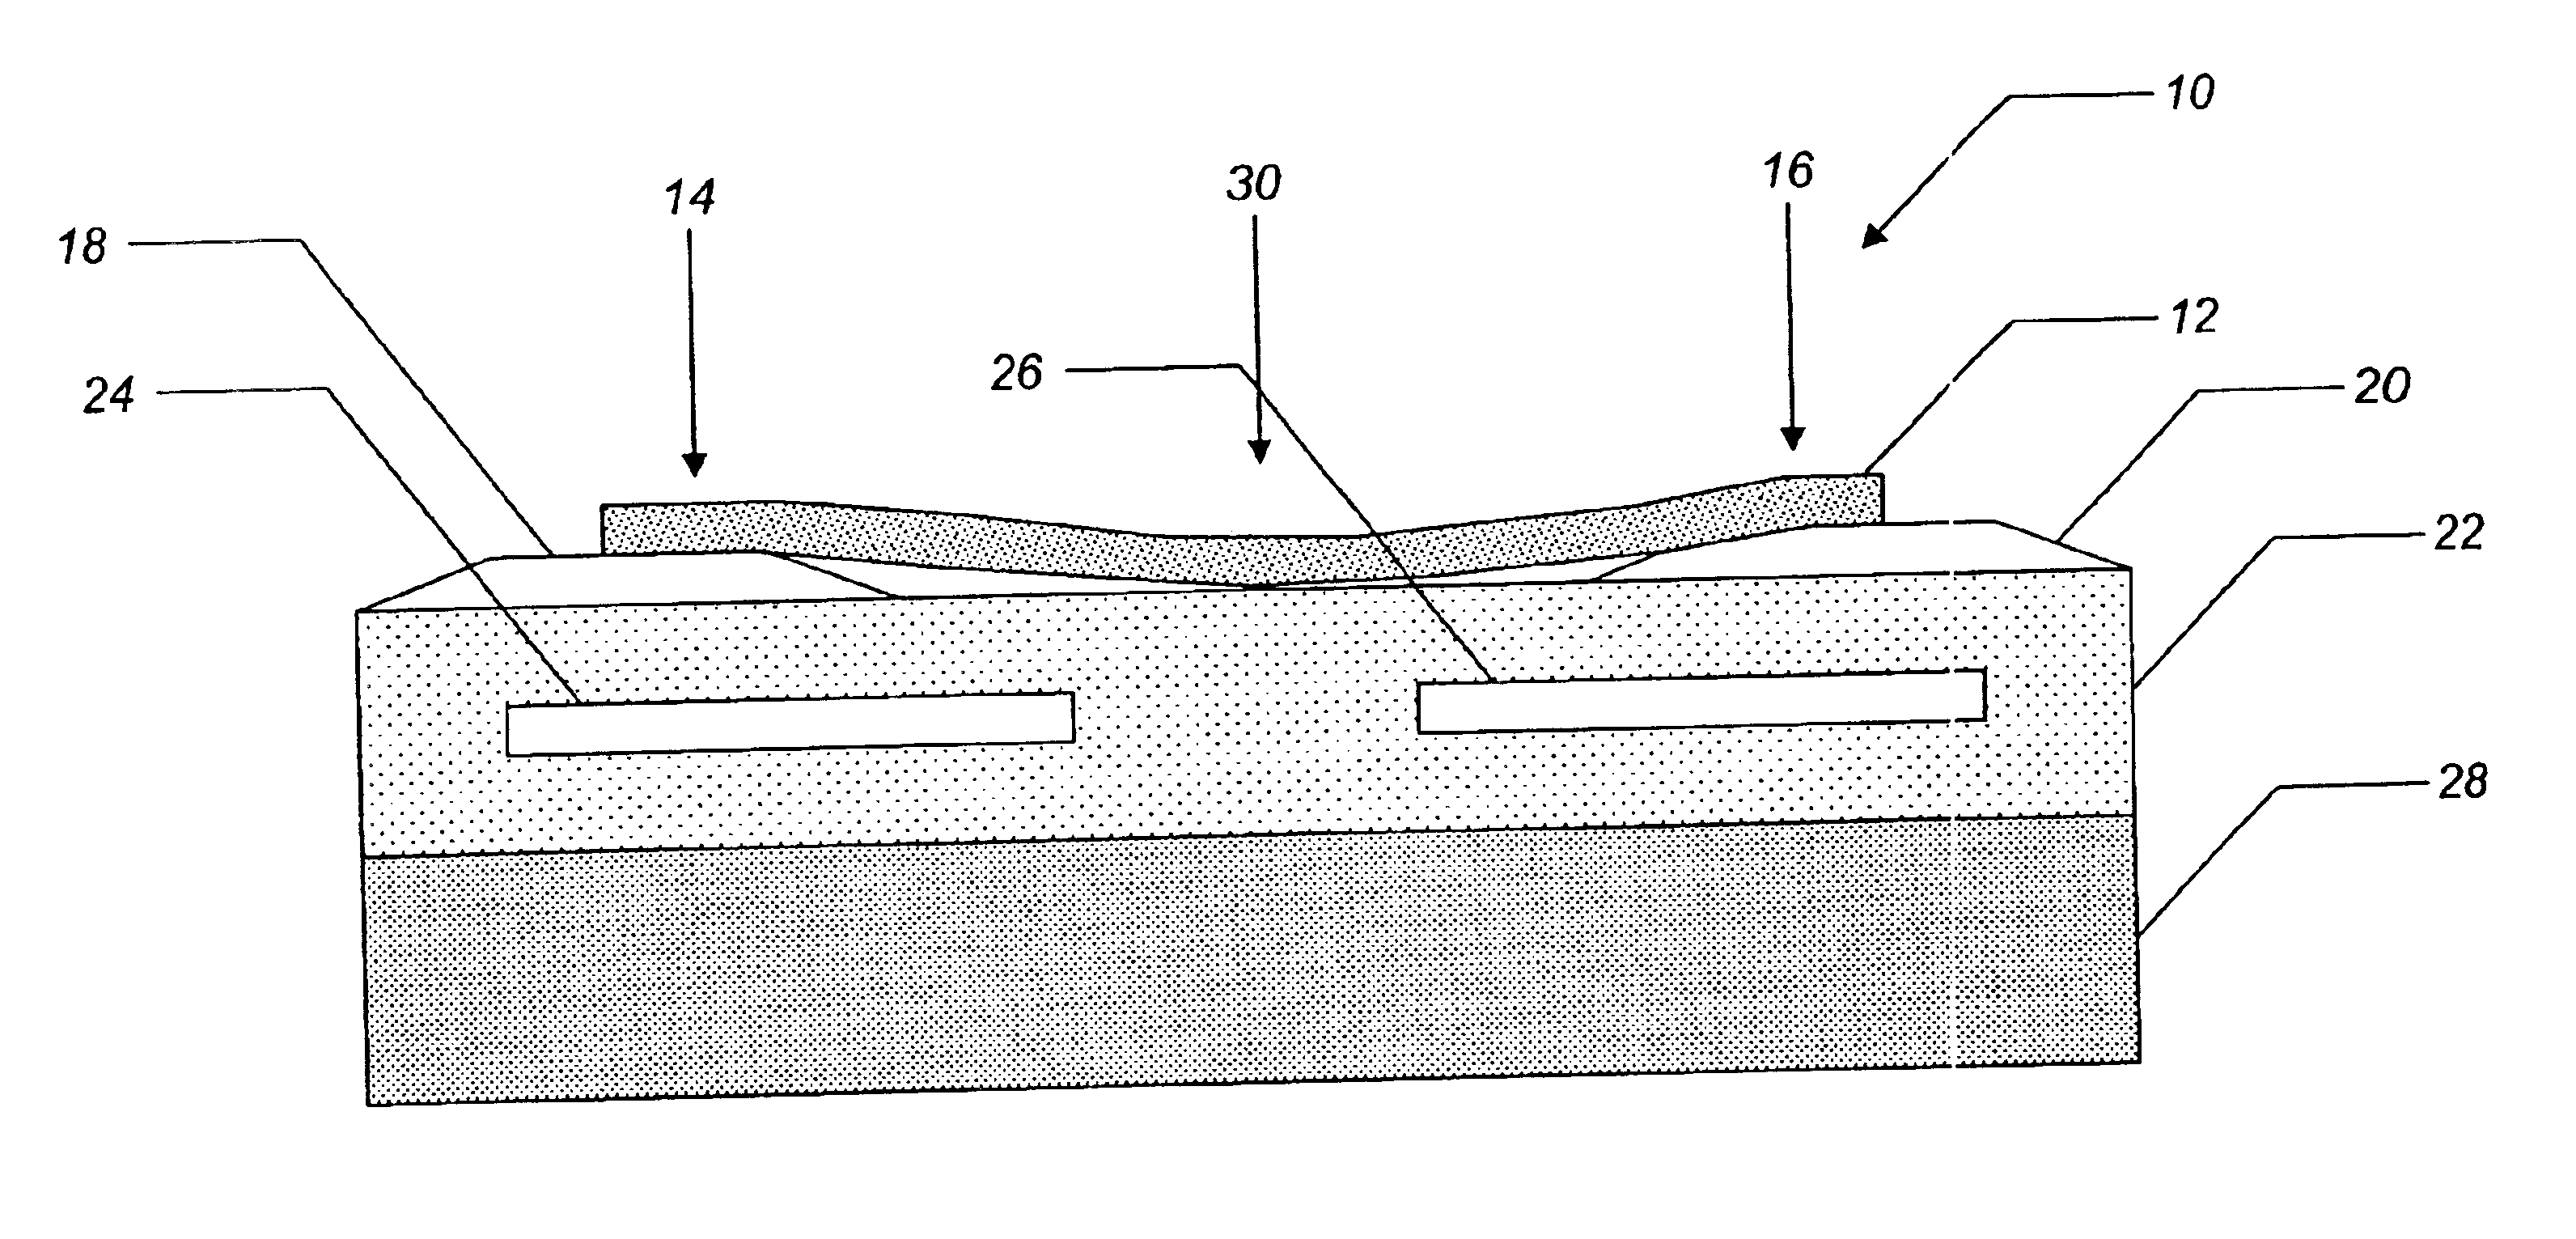 Method for forming an electrostatically-doped carbon nanotube device